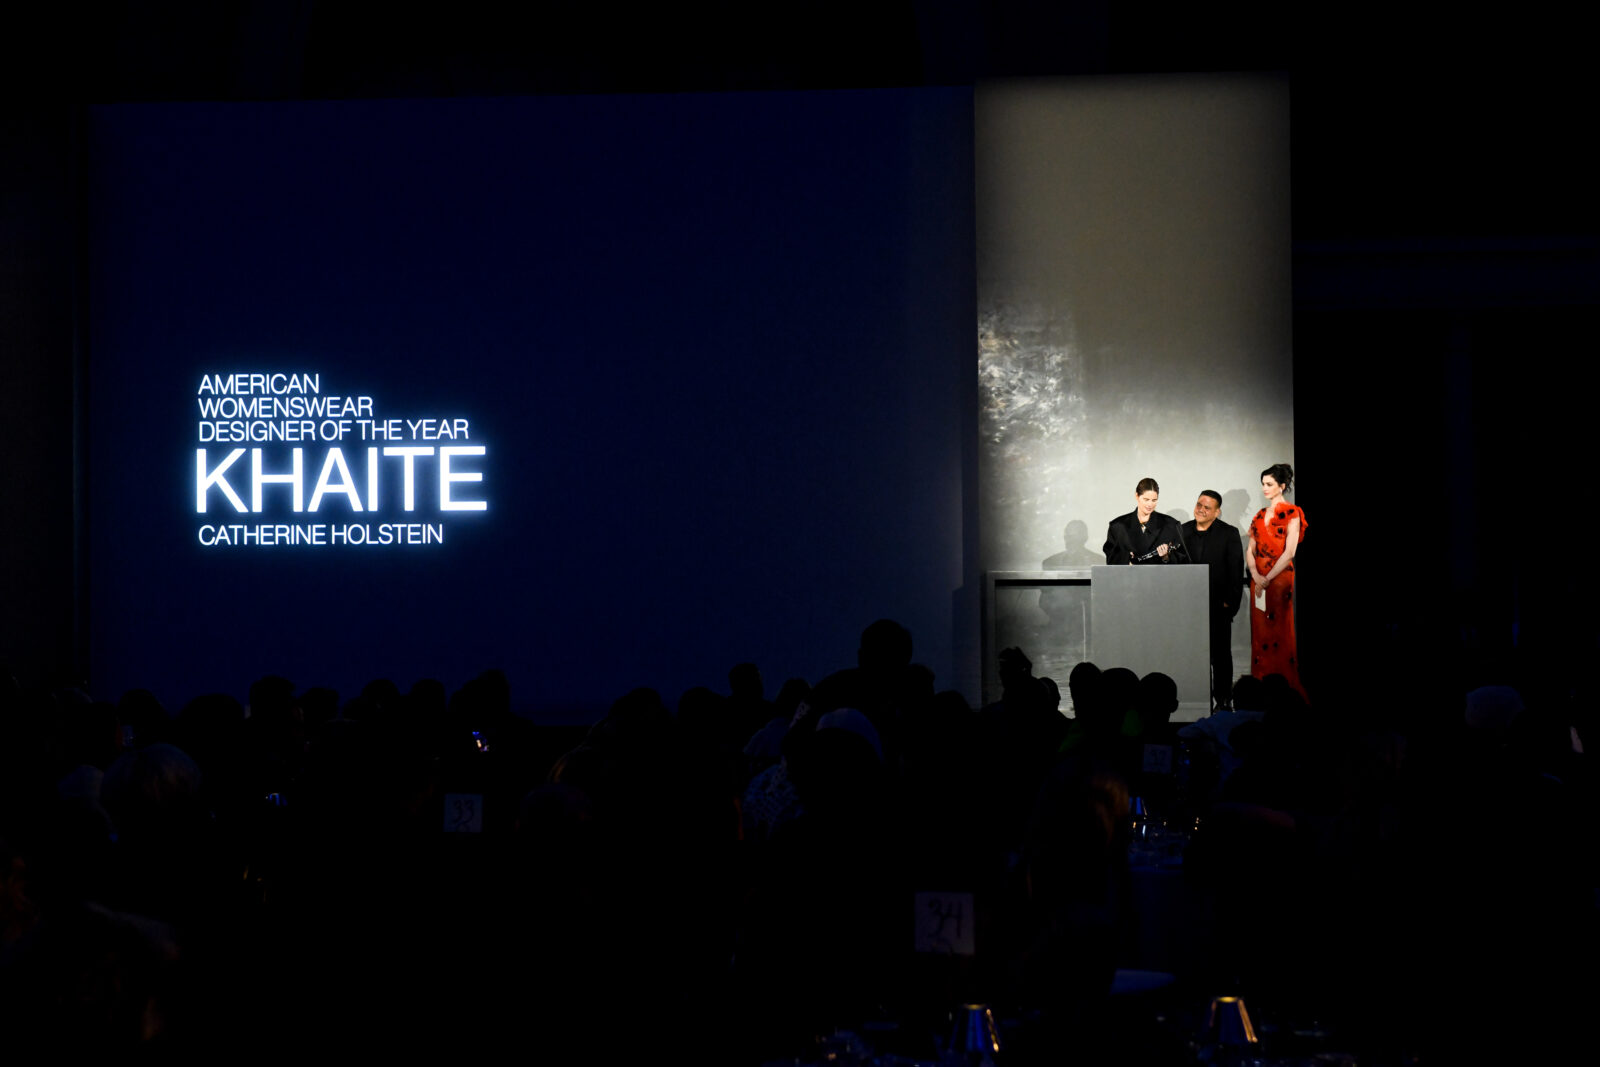 The spotlight shines on KHAITE as Catherine Holstein alongside Narciso Rodriguez and Anne Hathaway, is announced as the American Womenswear Designer of the Year at the CFDA Fashion Awards, a celebration of exceptional talent in the fashion industry.




